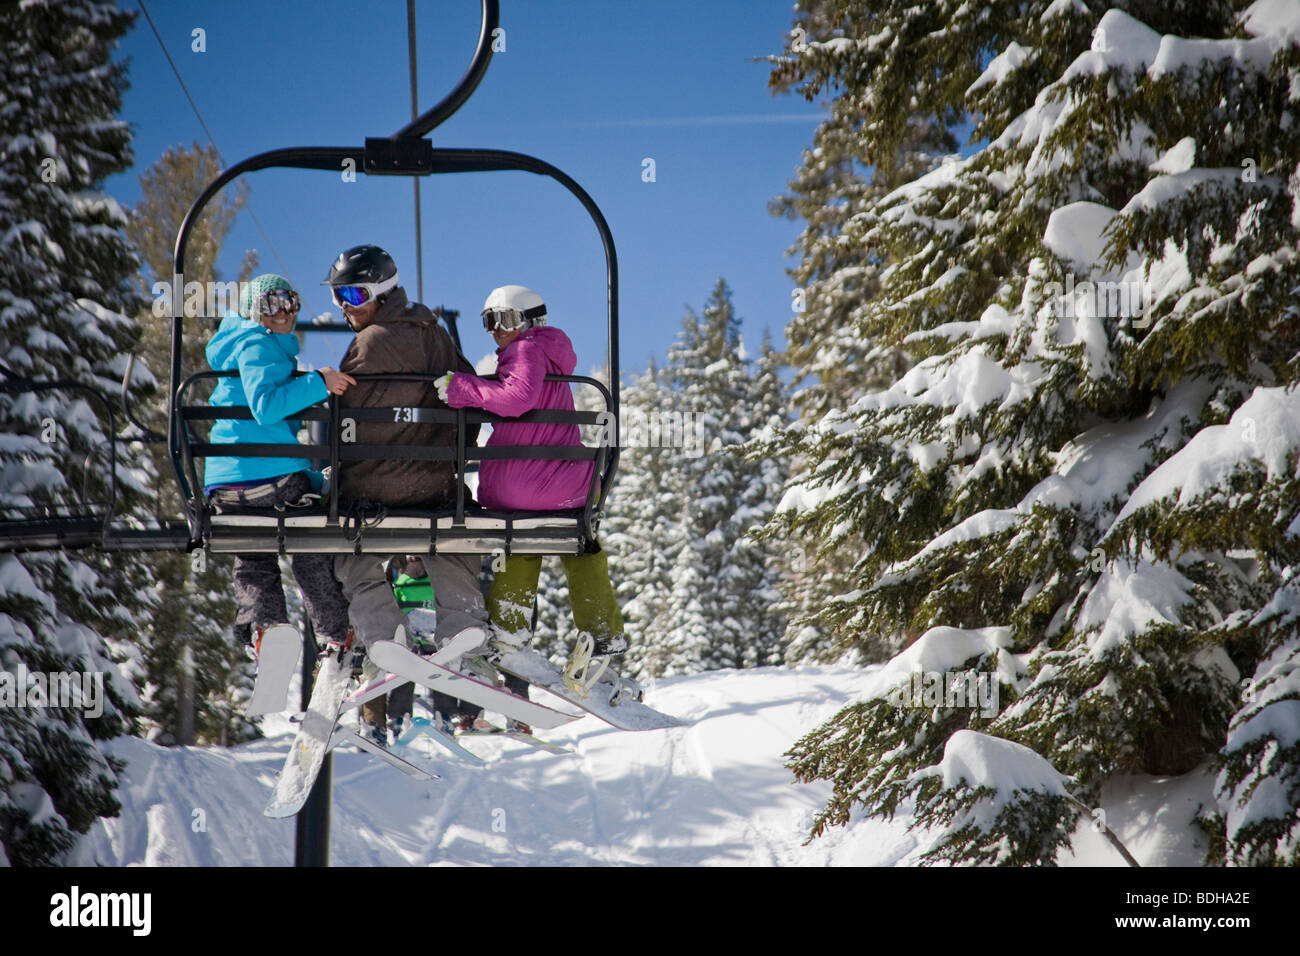 Three happy skiers on a chair lift on a sunny day in California. Stock Photo